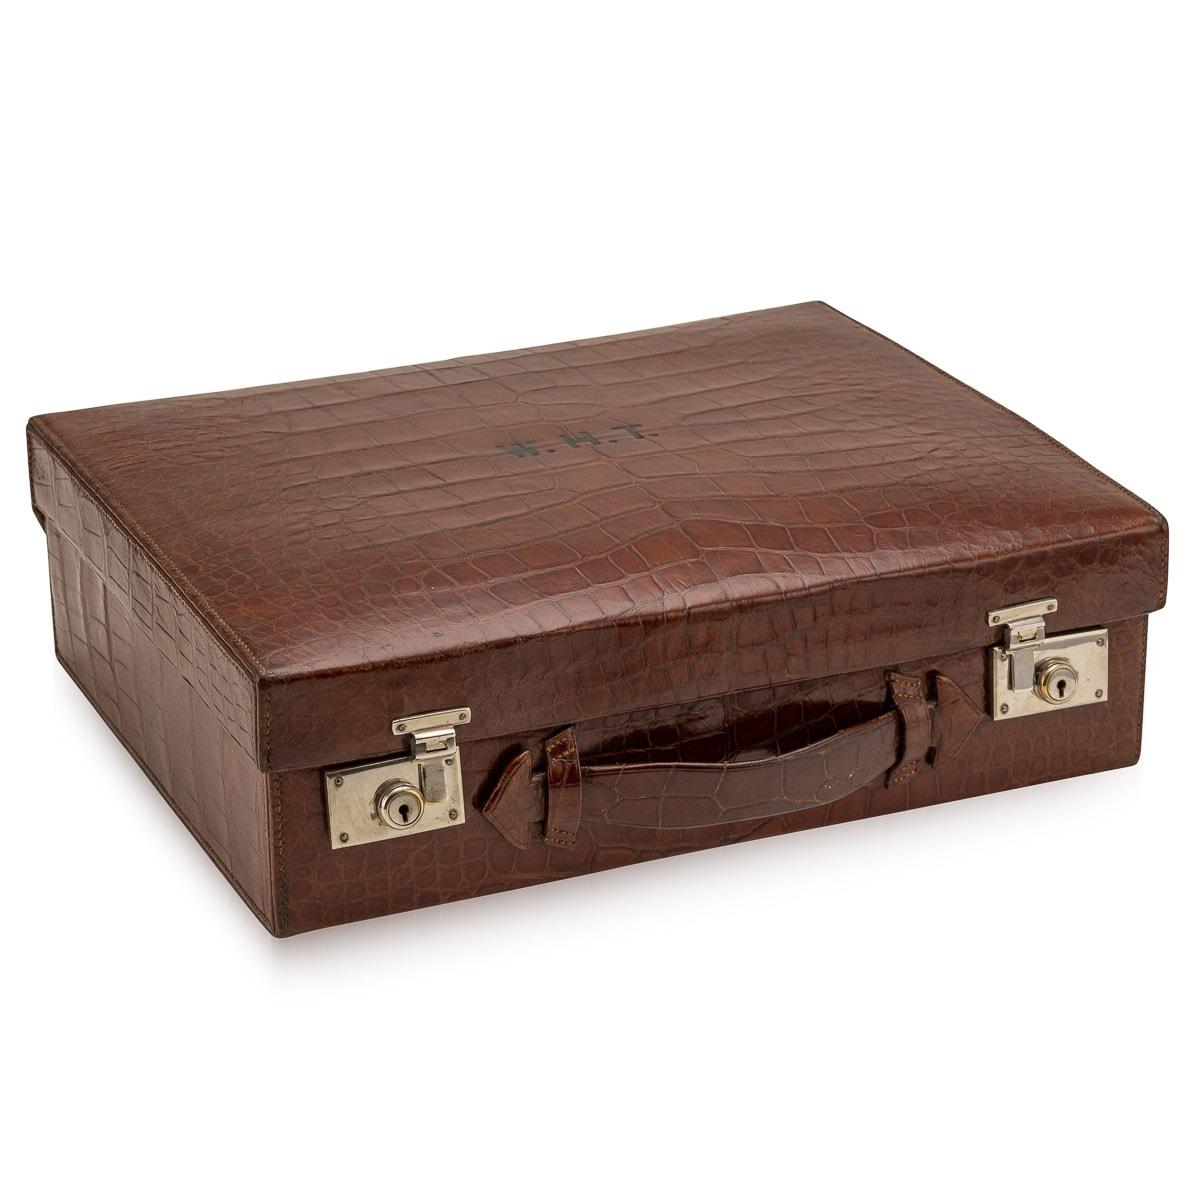 20th Century British Made Crocodile Travel Overnight Vanity Case, c.1900 In Good Condition For Sale In Royal Tunbridge Wells, Kent